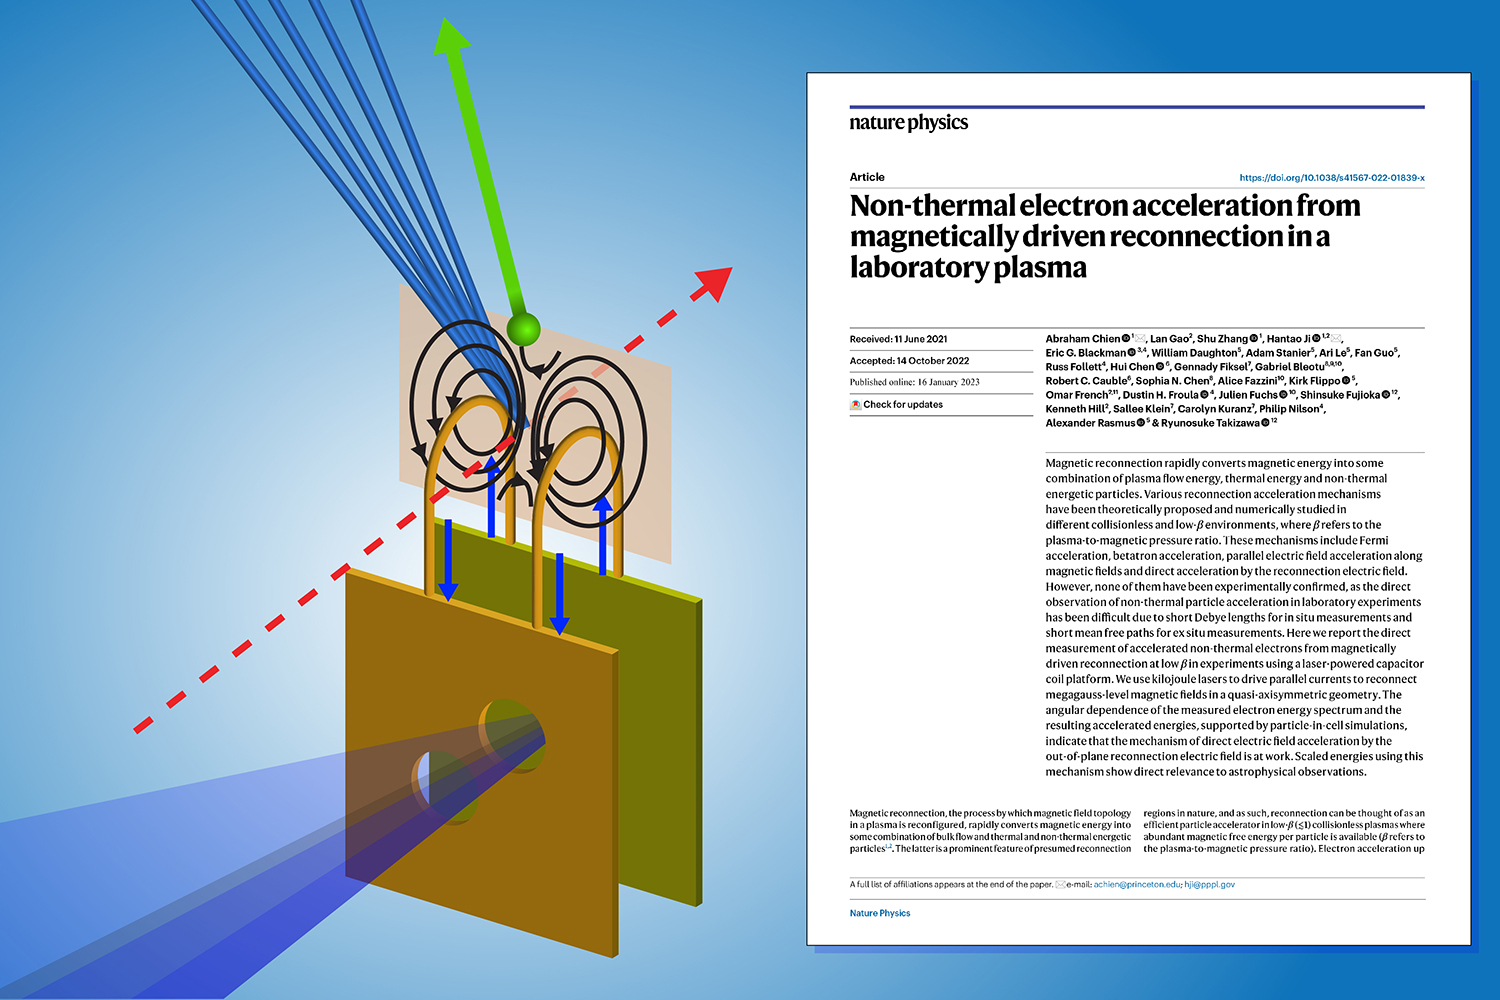 Chien Nature Physics Paper and an illustration of a capacitor coil target driven by two long-pulse lasers.